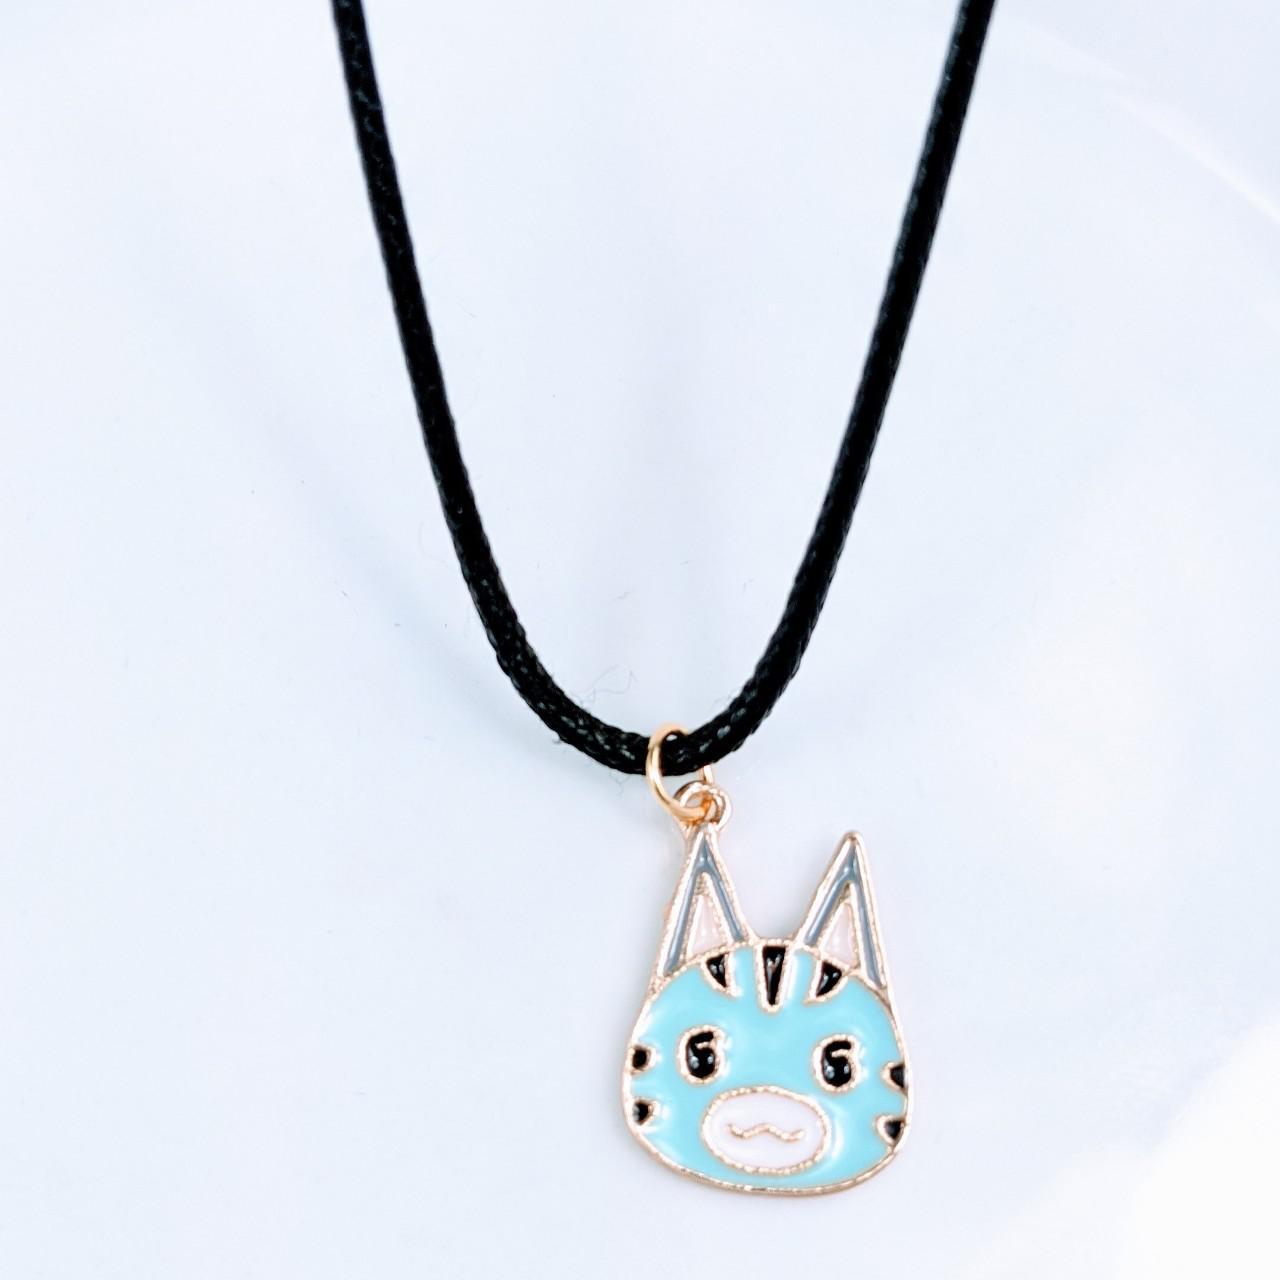 Product Image 1 - Animal Crossing Cat Necklace
Brand new.